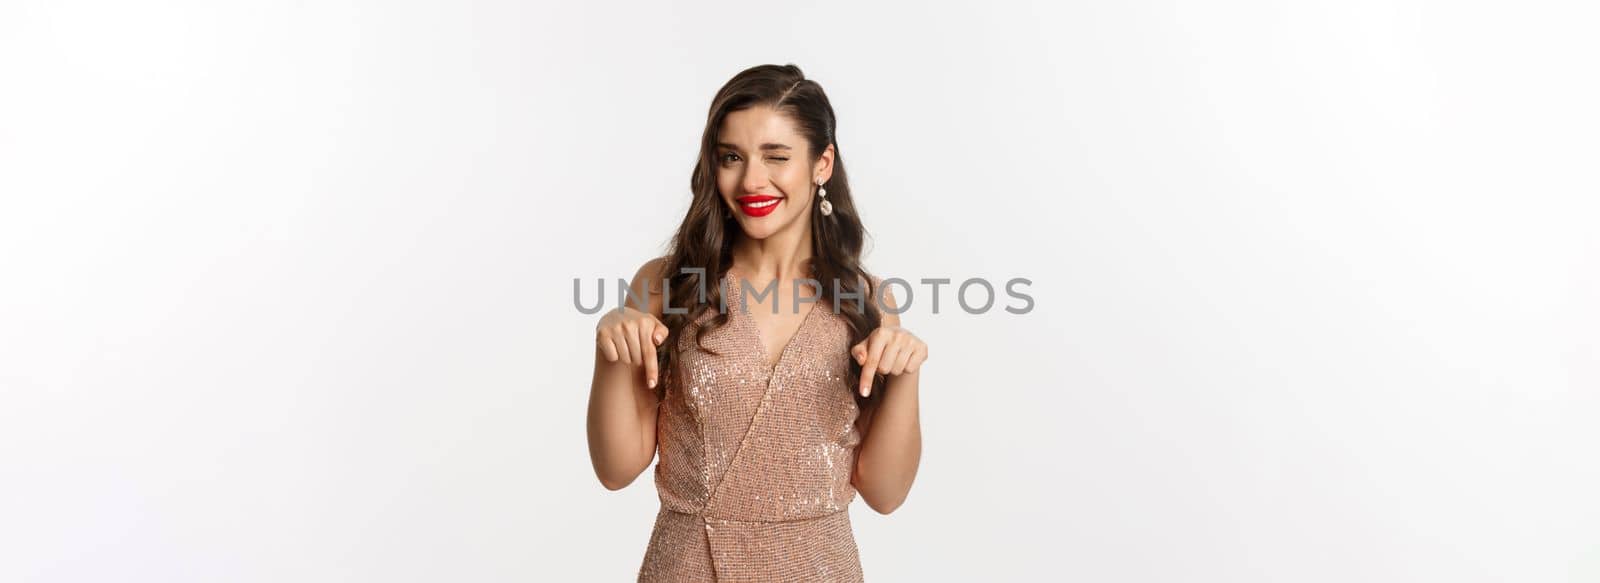 Elegant female model with red lips and earrings, pointing fingers down at christmas offer, winking and smiling, showing promo, standing in party dress over white background.